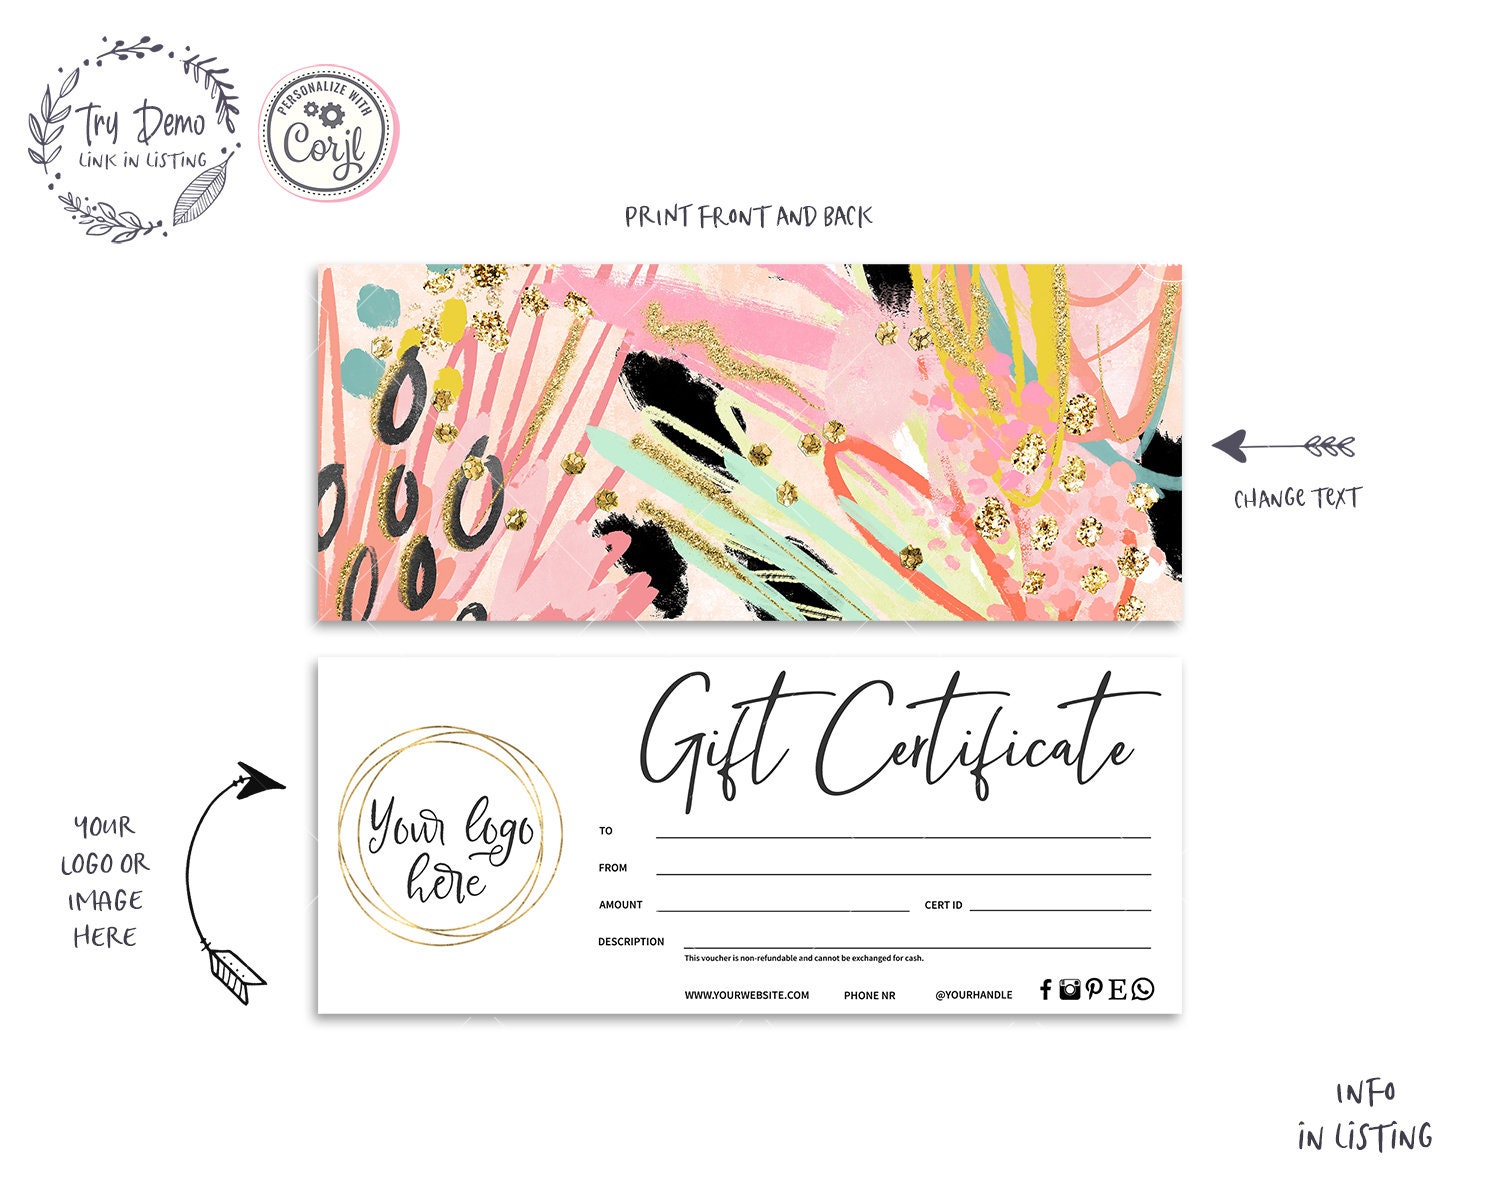 Gift Certificate Template, Abstract - Candy Jar Studios